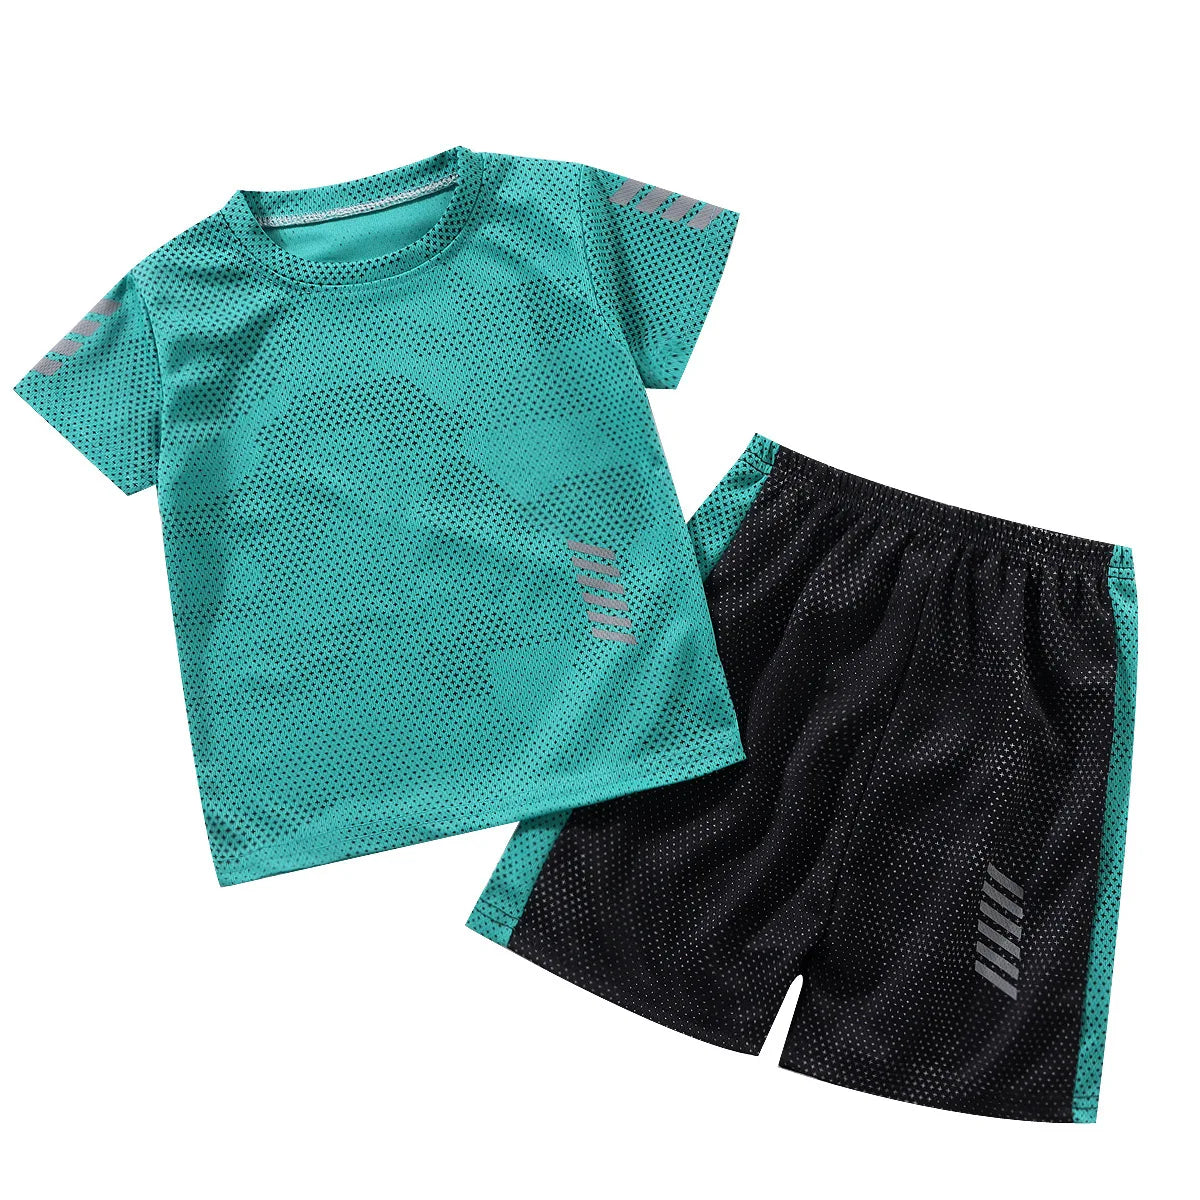 Boys Summer Quick Drying Tracksuits 2PC Sets